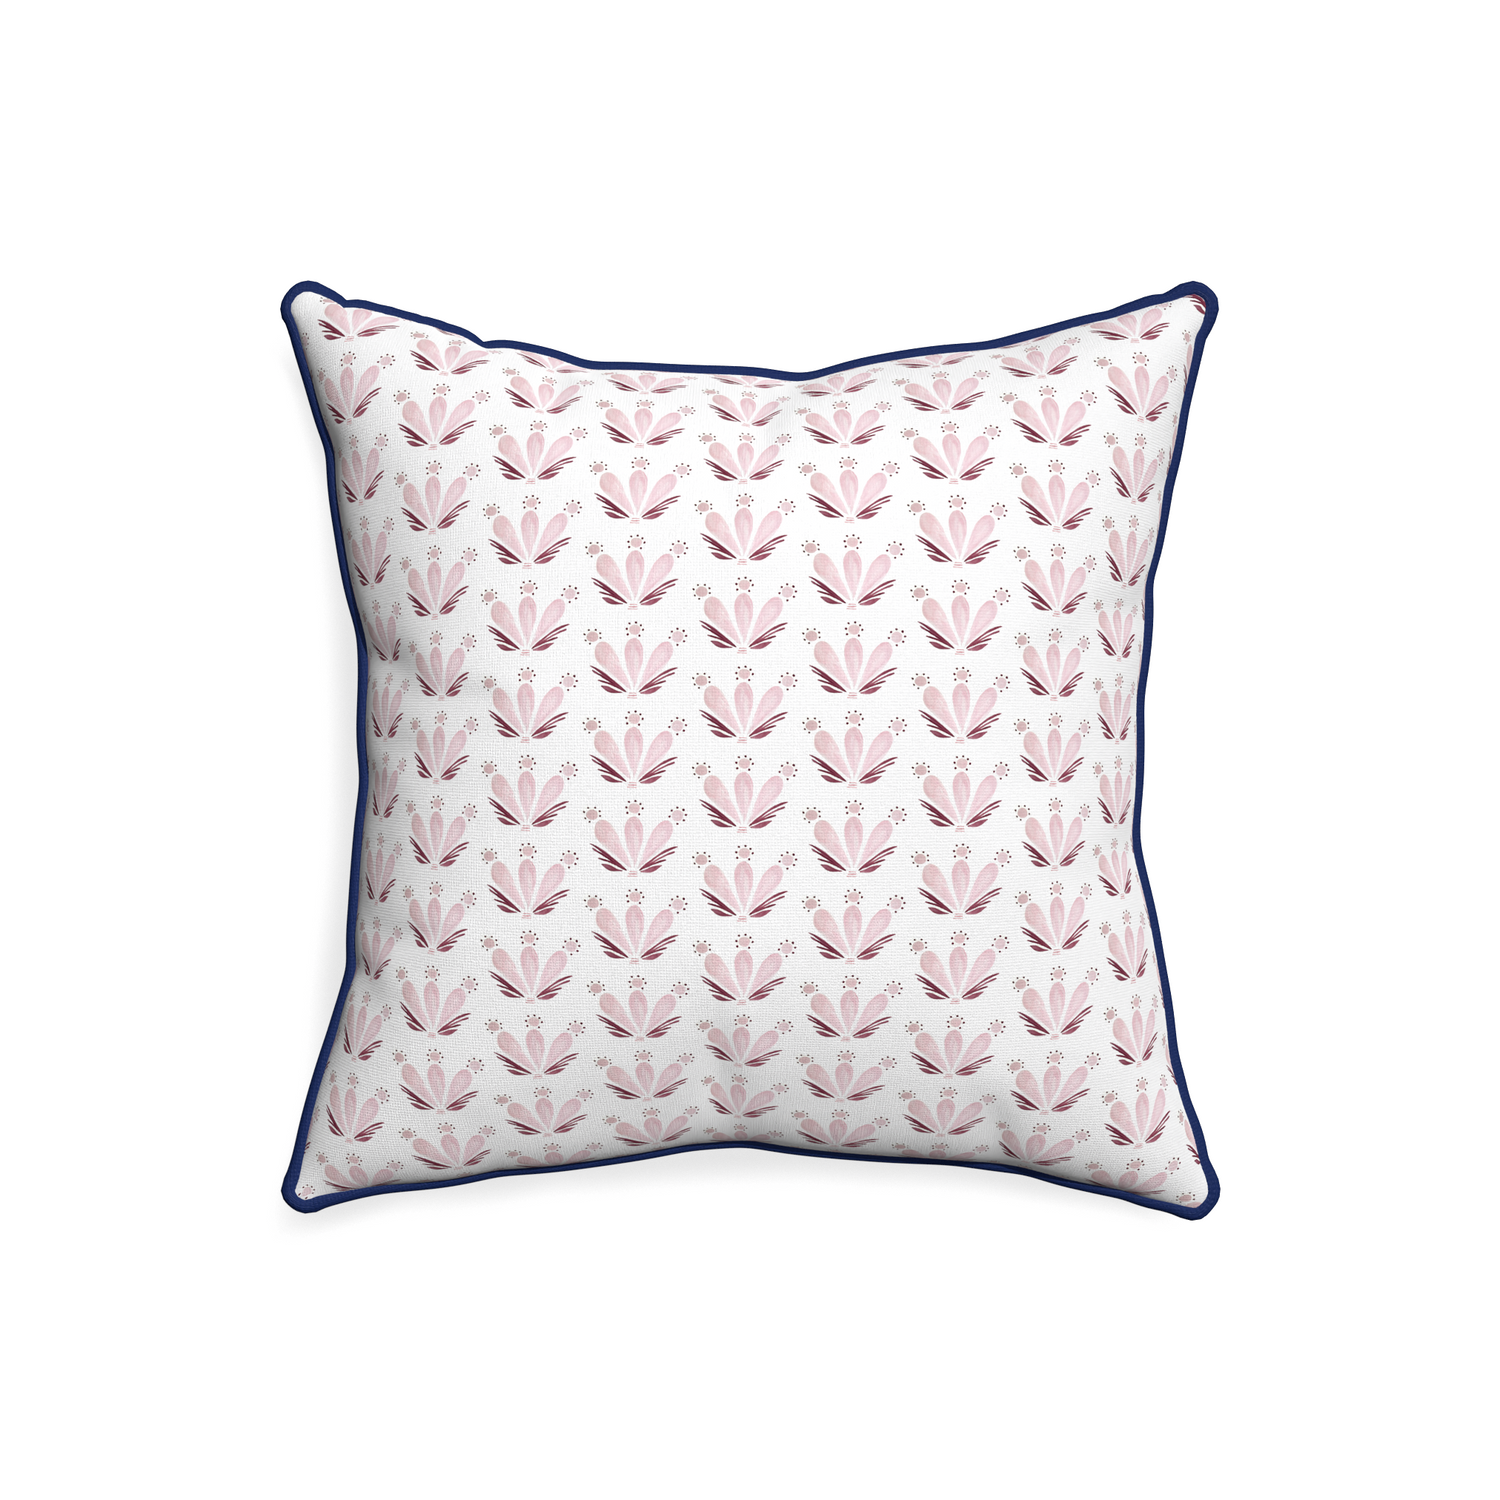 20-square serena pink custom pillow with midnight piping on white background